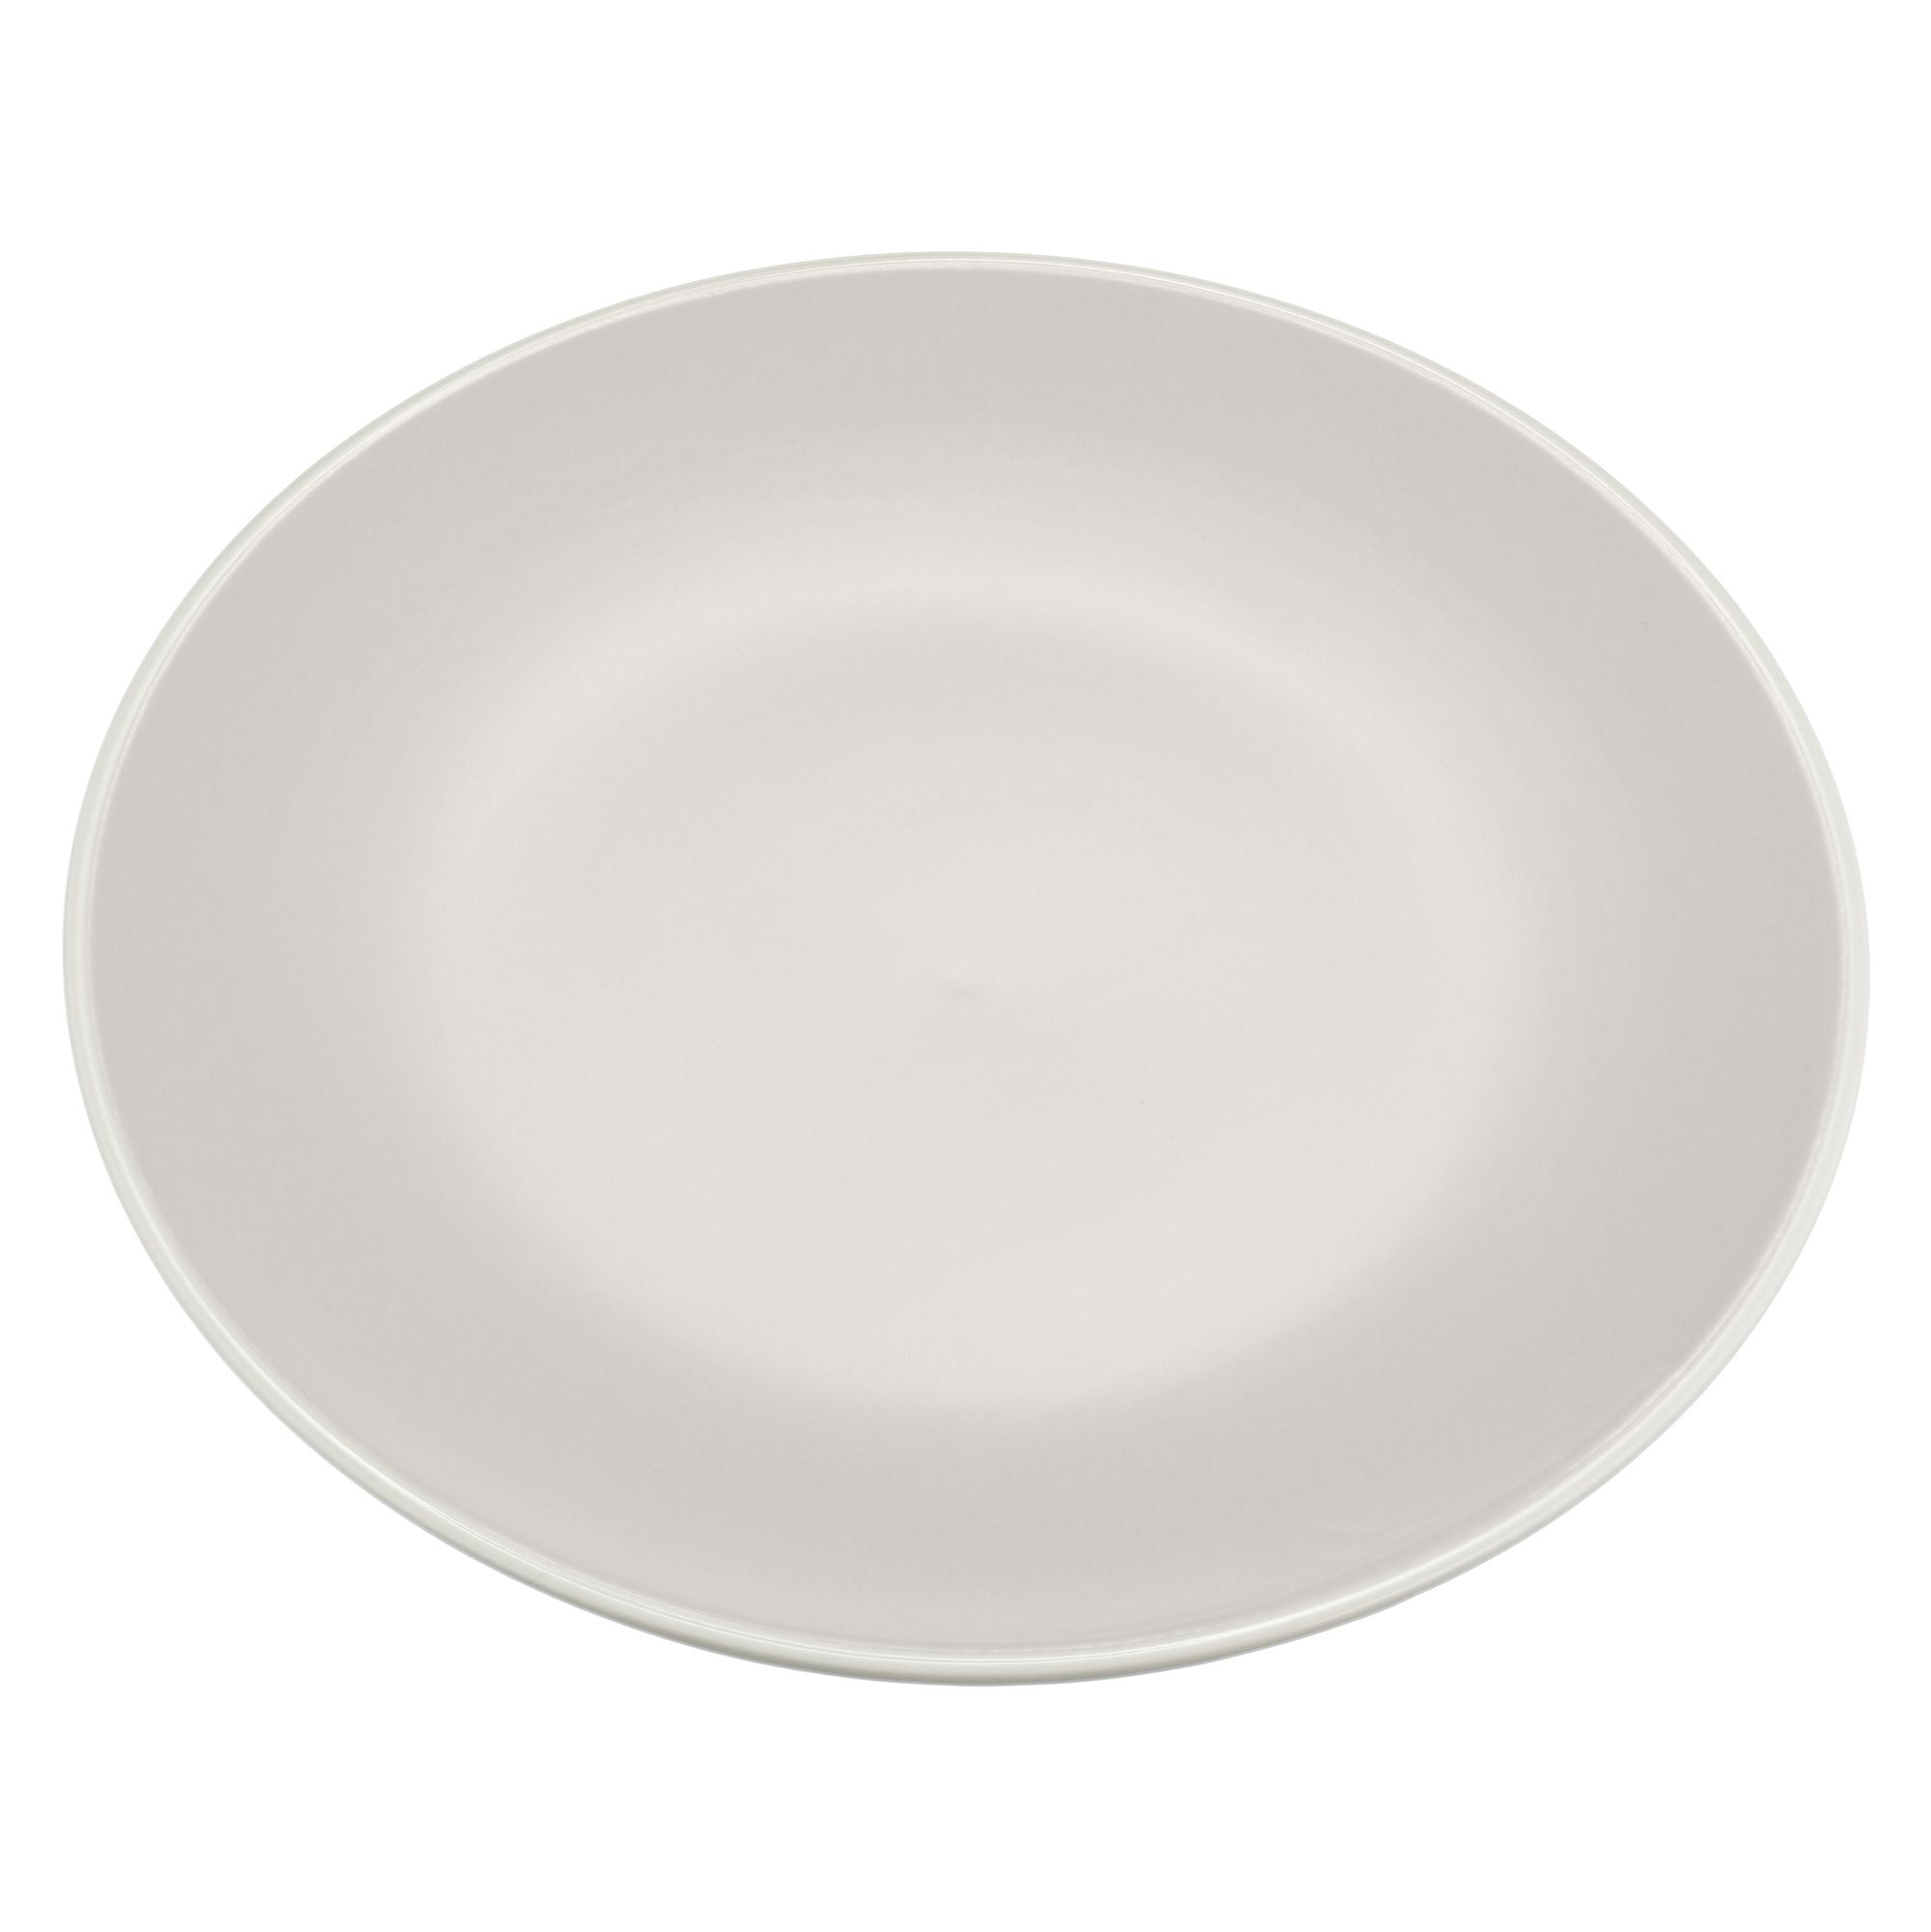 Stone Dinner Plate from China Blue